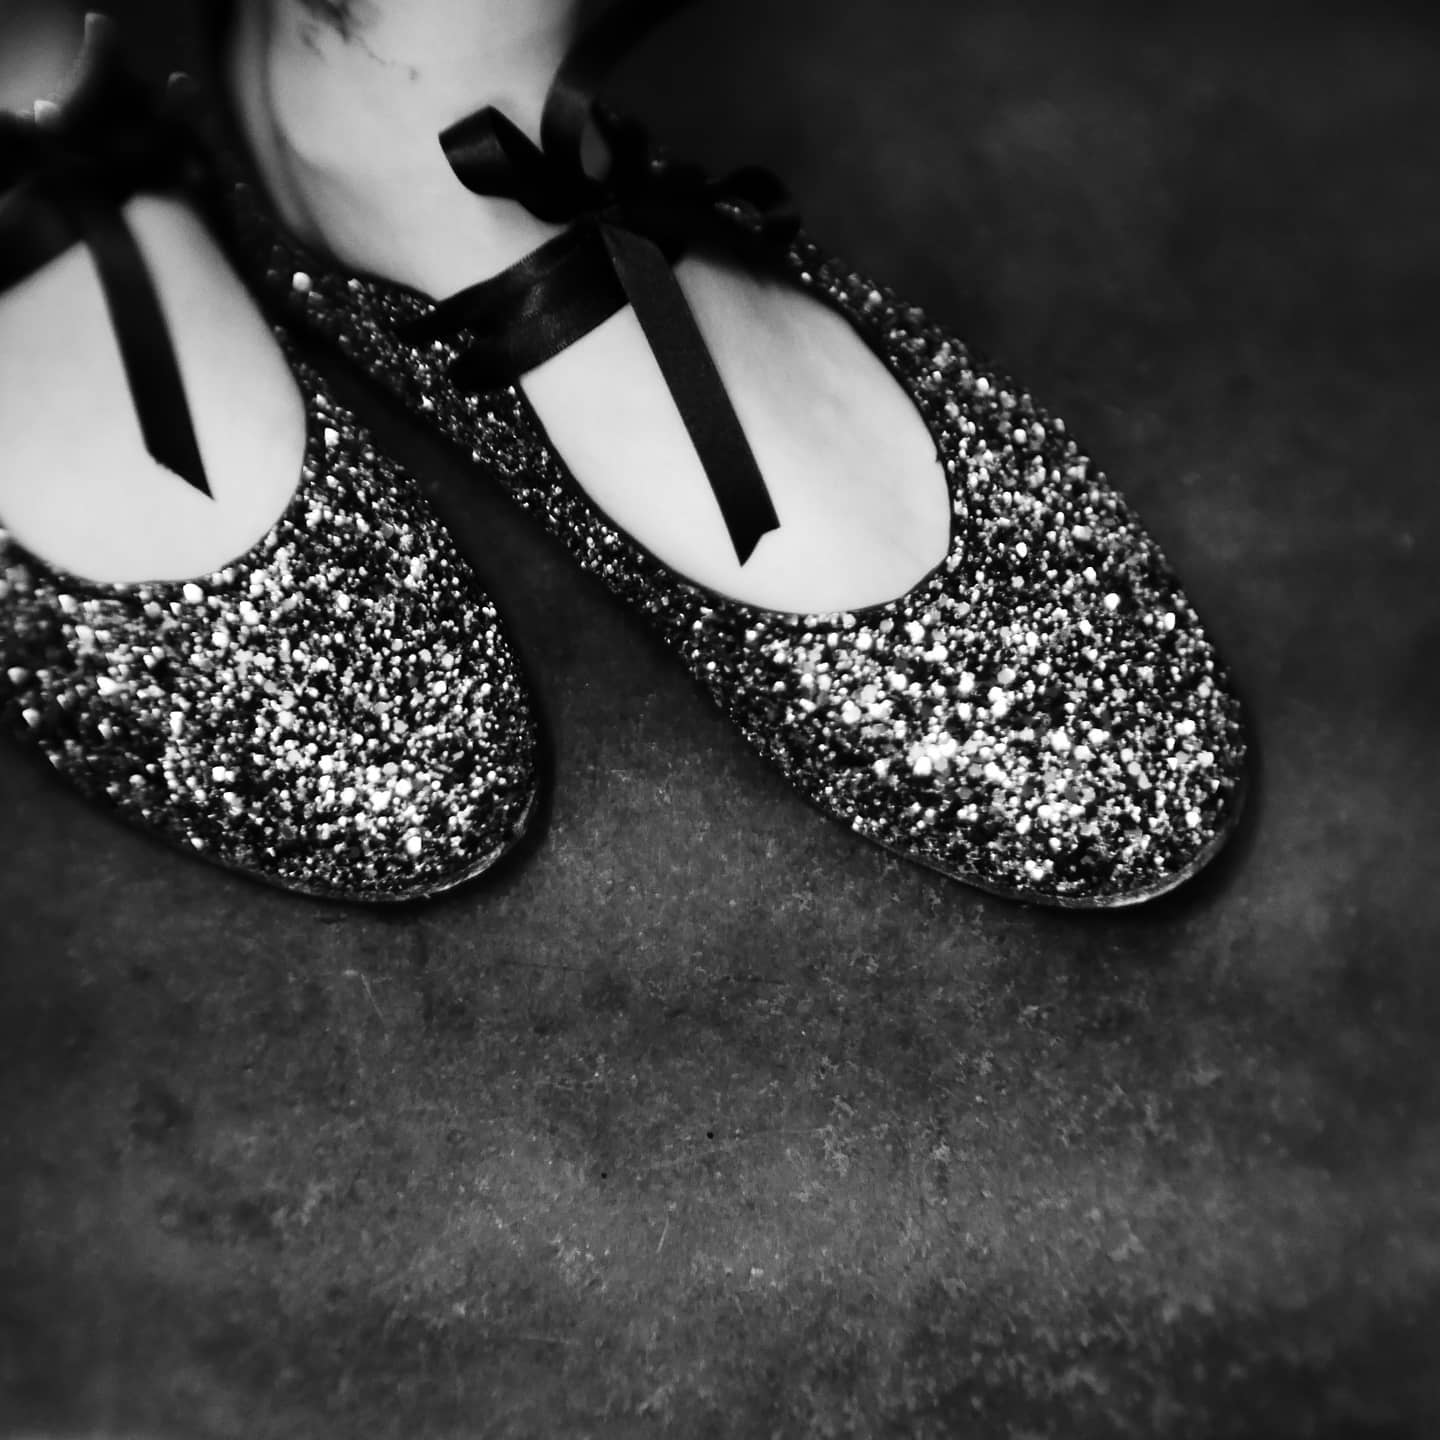 Myself wearing the ballerina flats showcasing the contrast of the black satin laces and the sparkle of the shoes